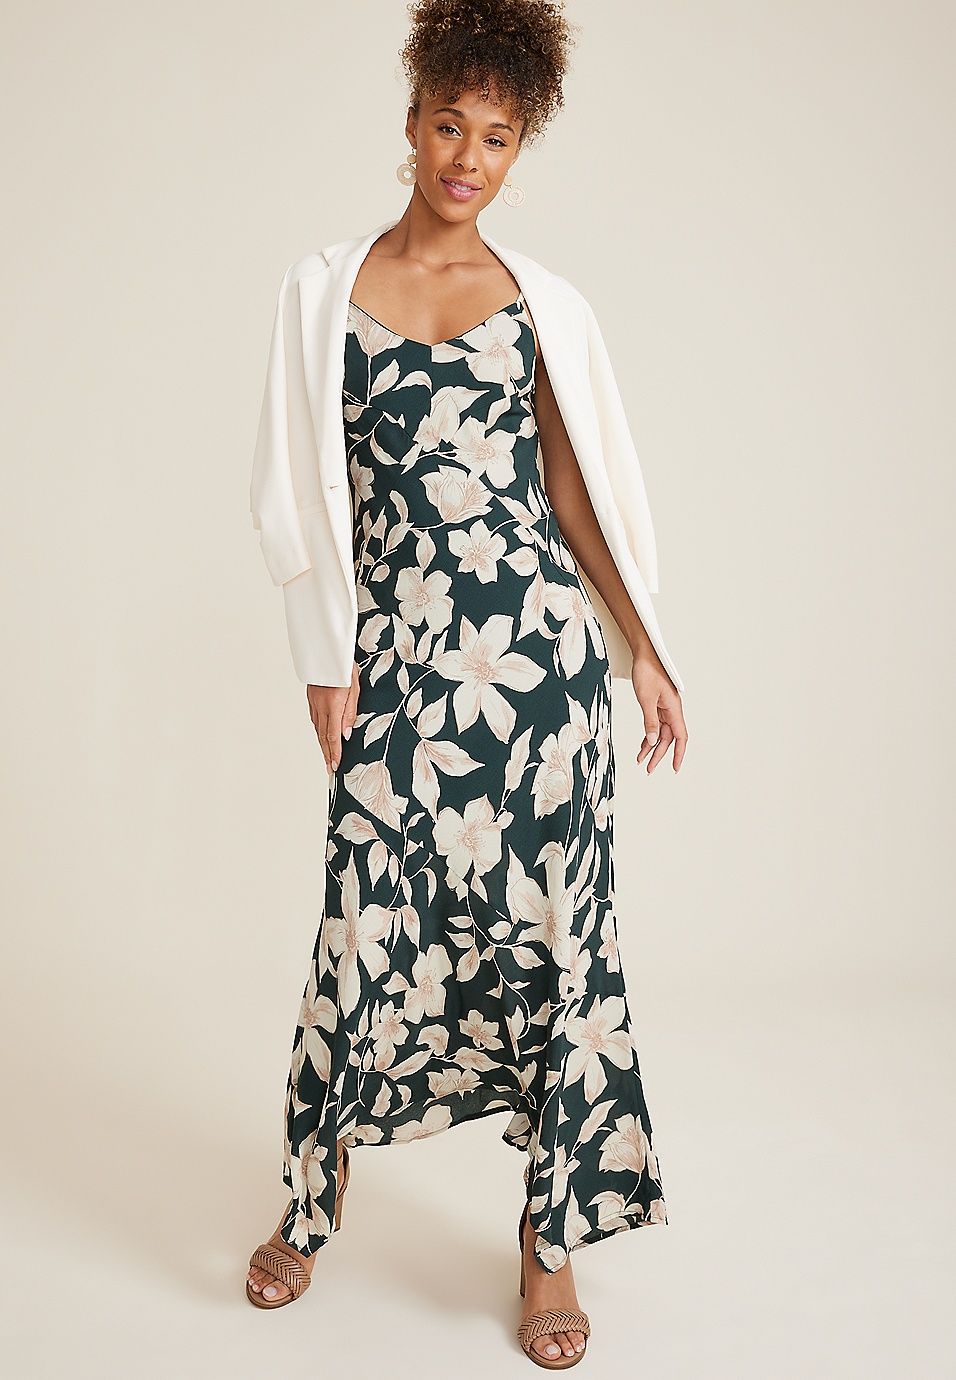 Bare Floral Slip Maxi Dress | Maurices